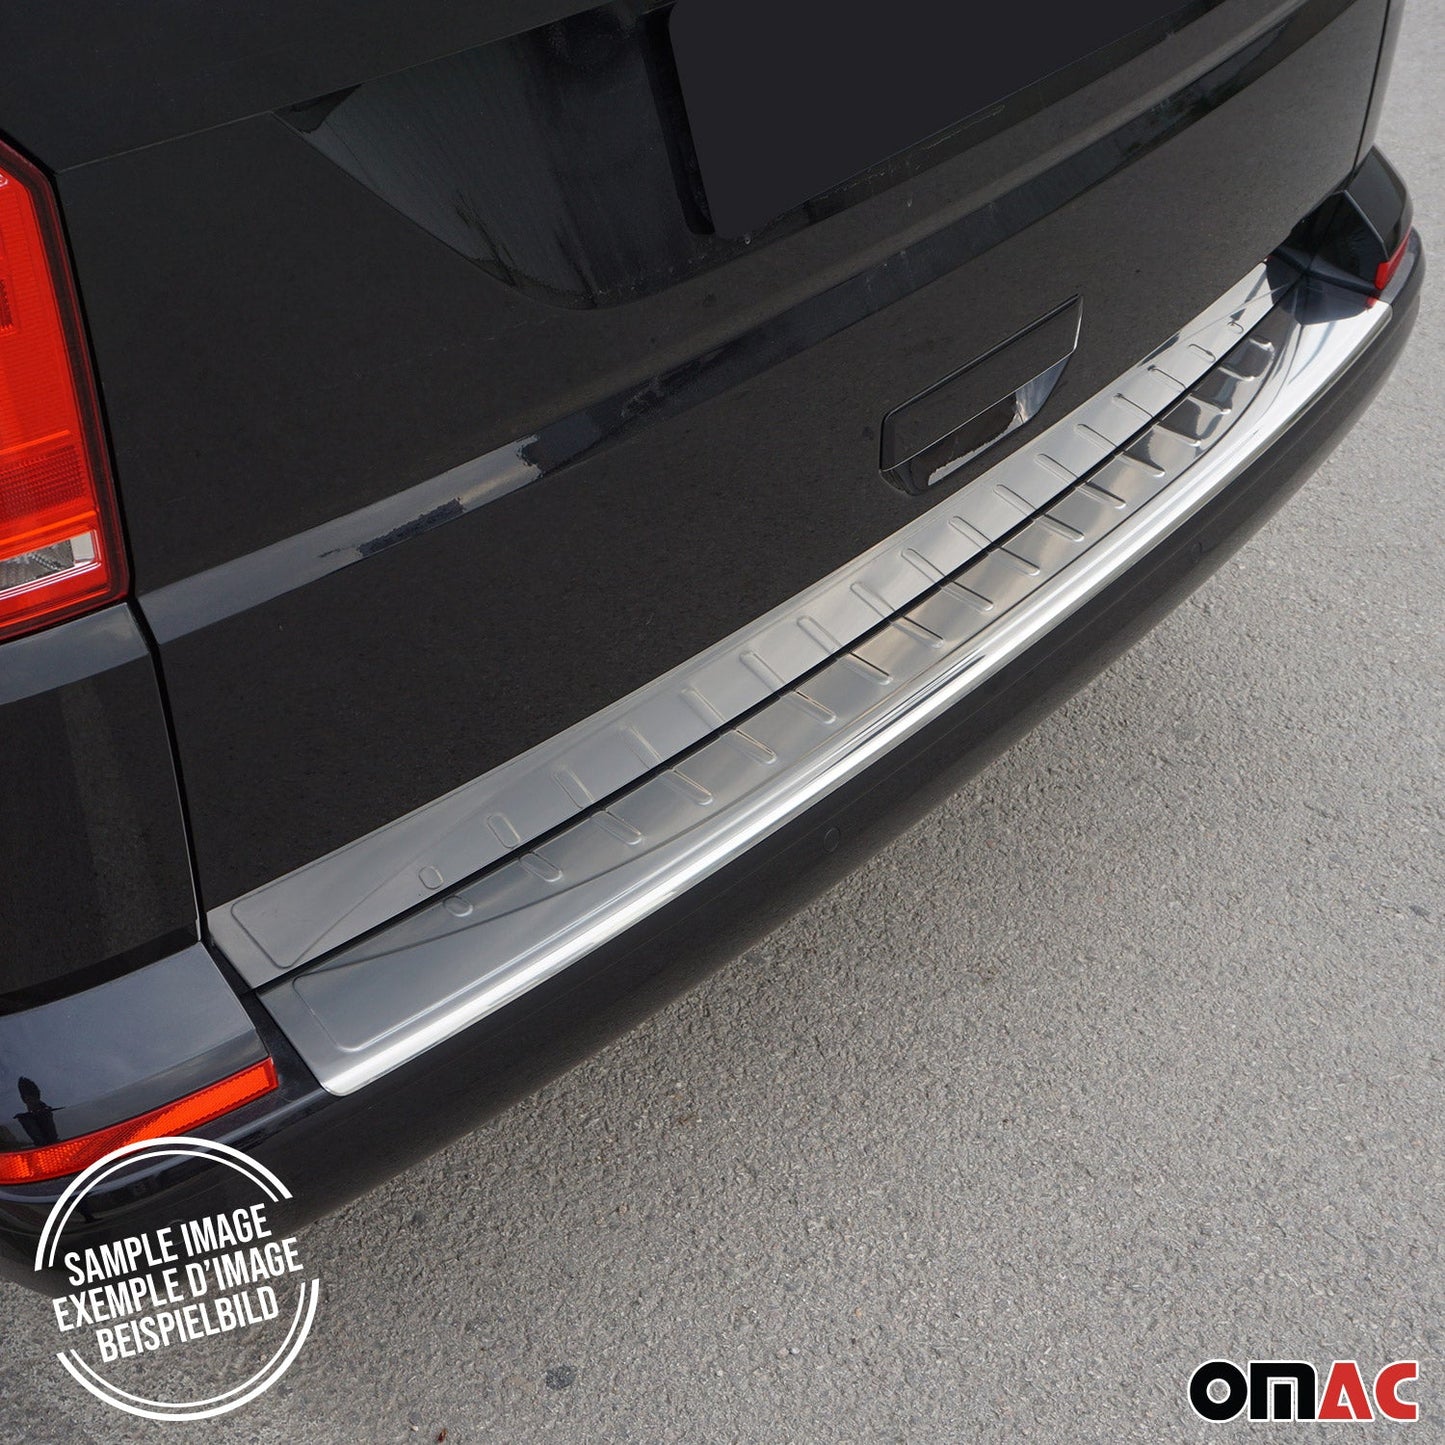 OMAC Chrome Rear Bumper Guard For Opel Astra J 2010-2015 Trunk Sill Protector S.Steel 5216095